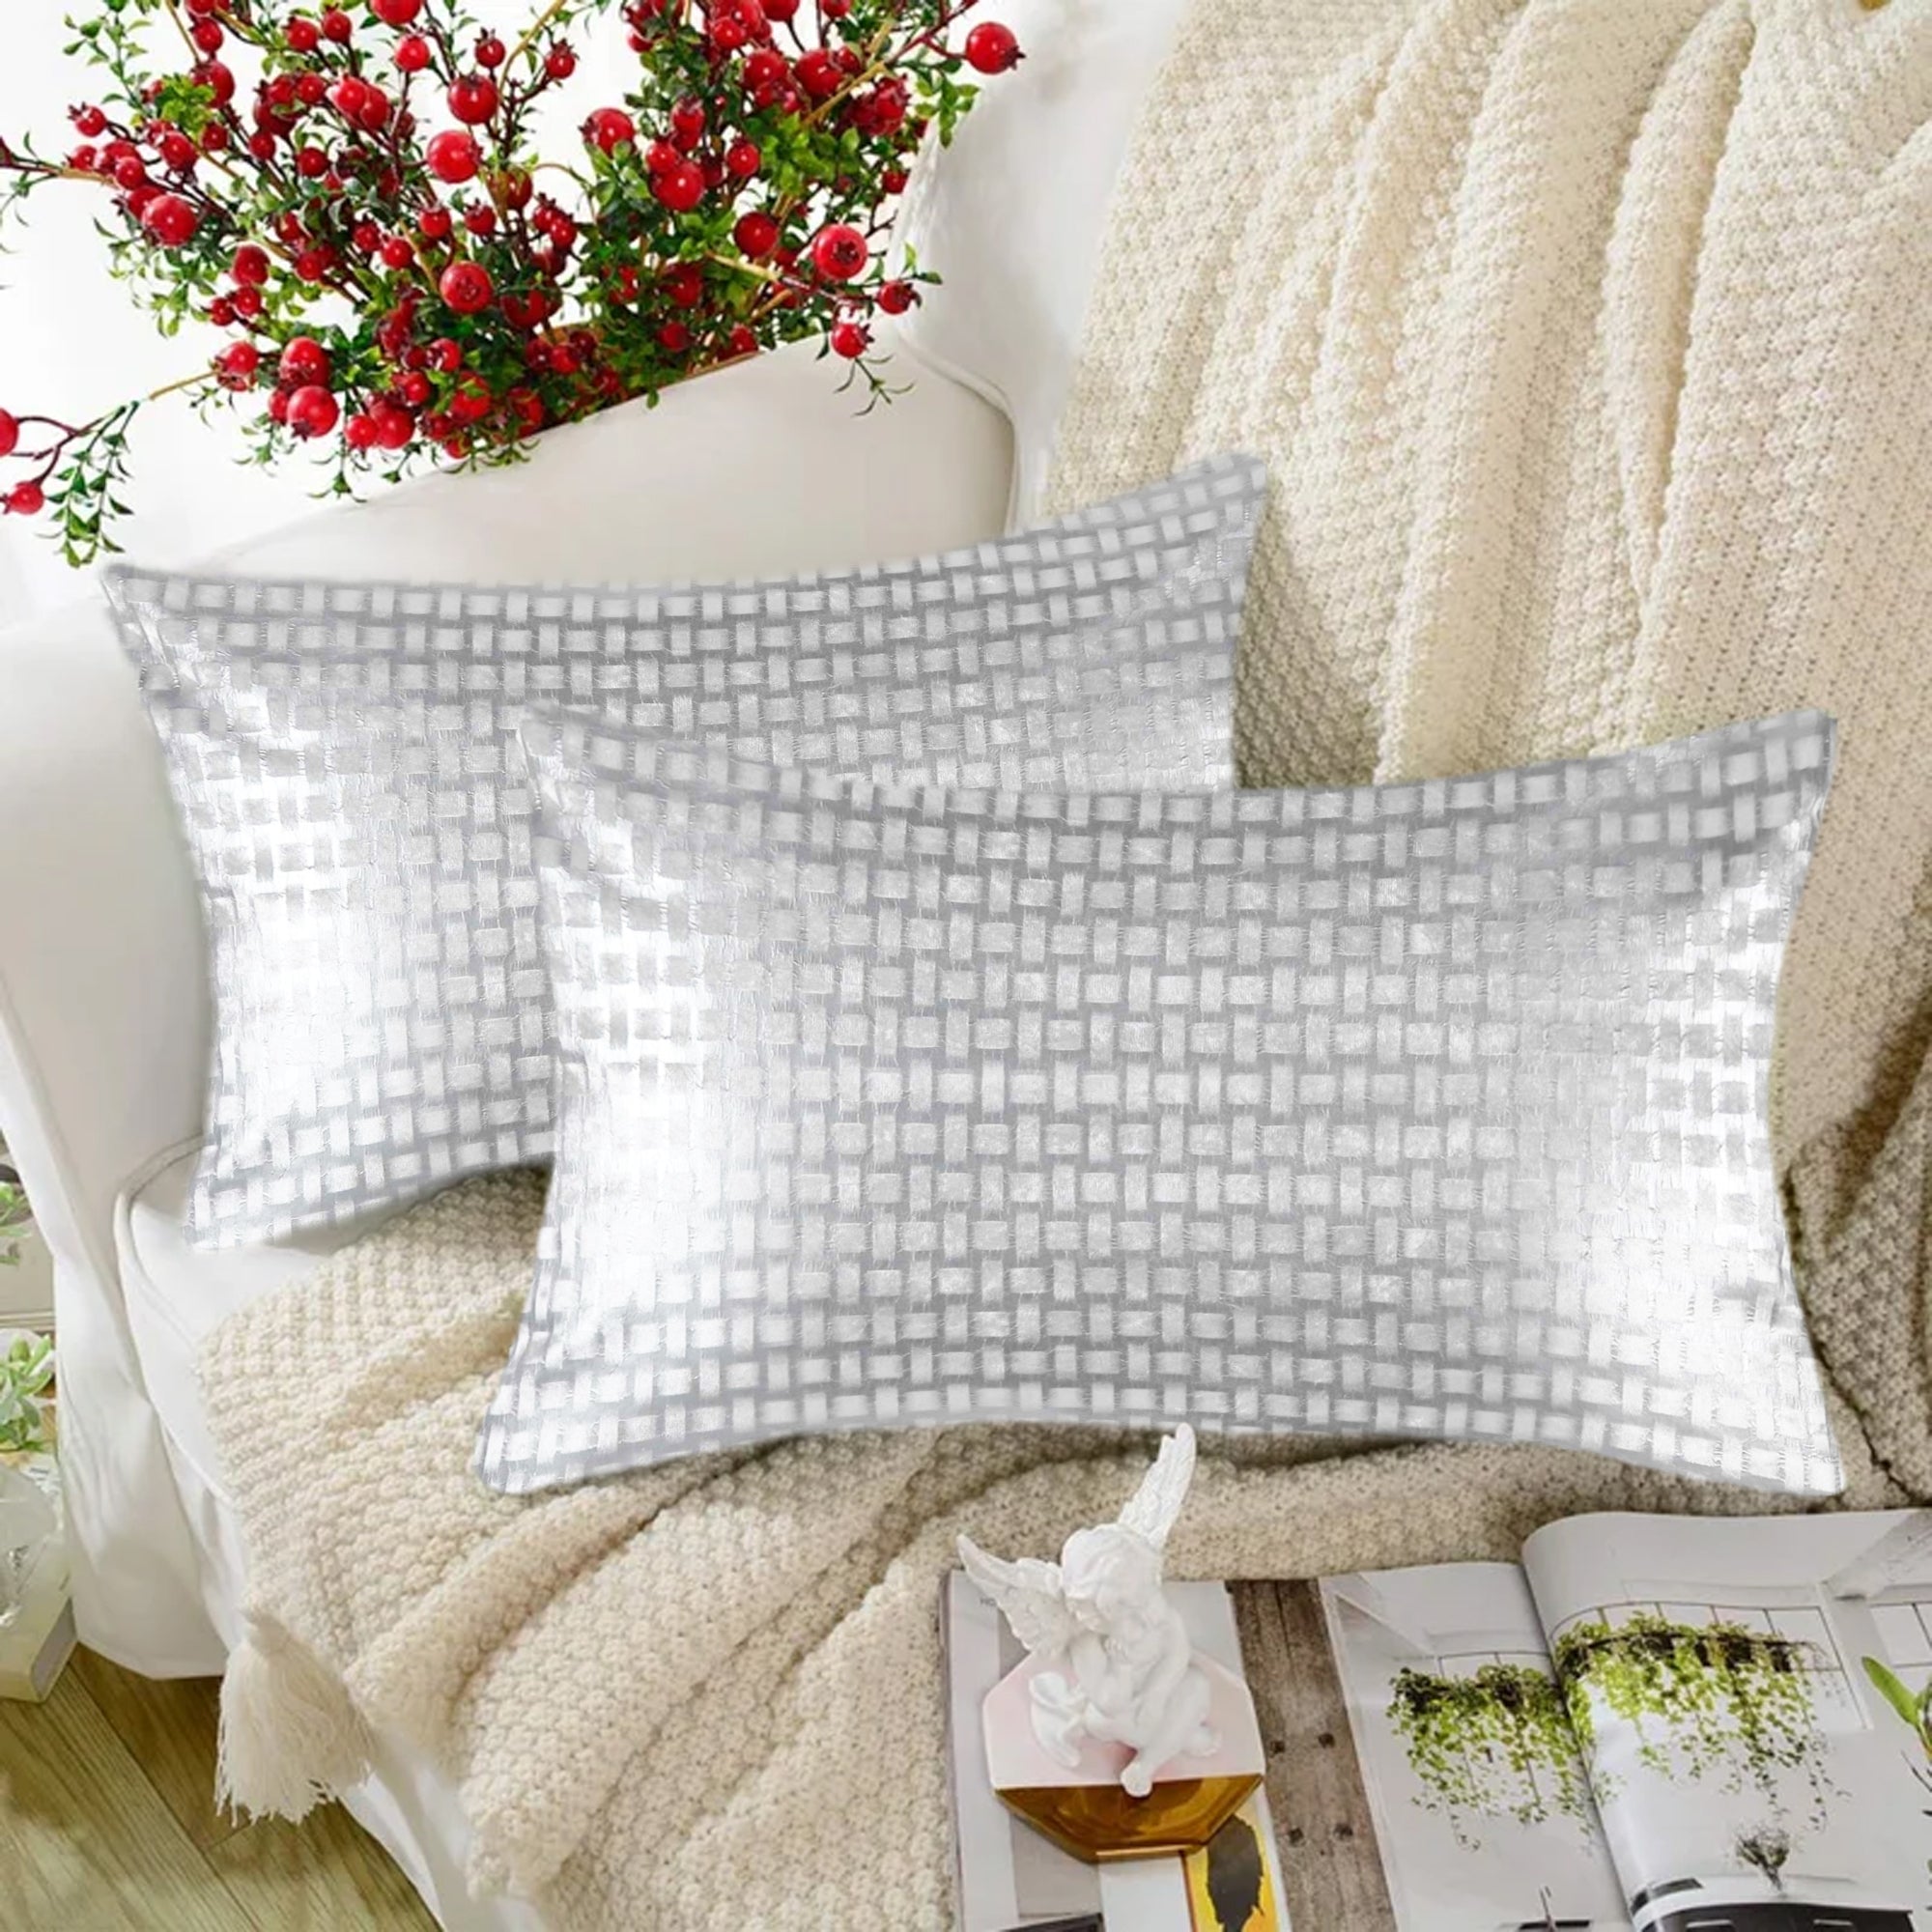 Tesmare Luxury Style Cushion Cover Super Soft Pillowcases set of 2, 12 x 20 inch, White/Silver